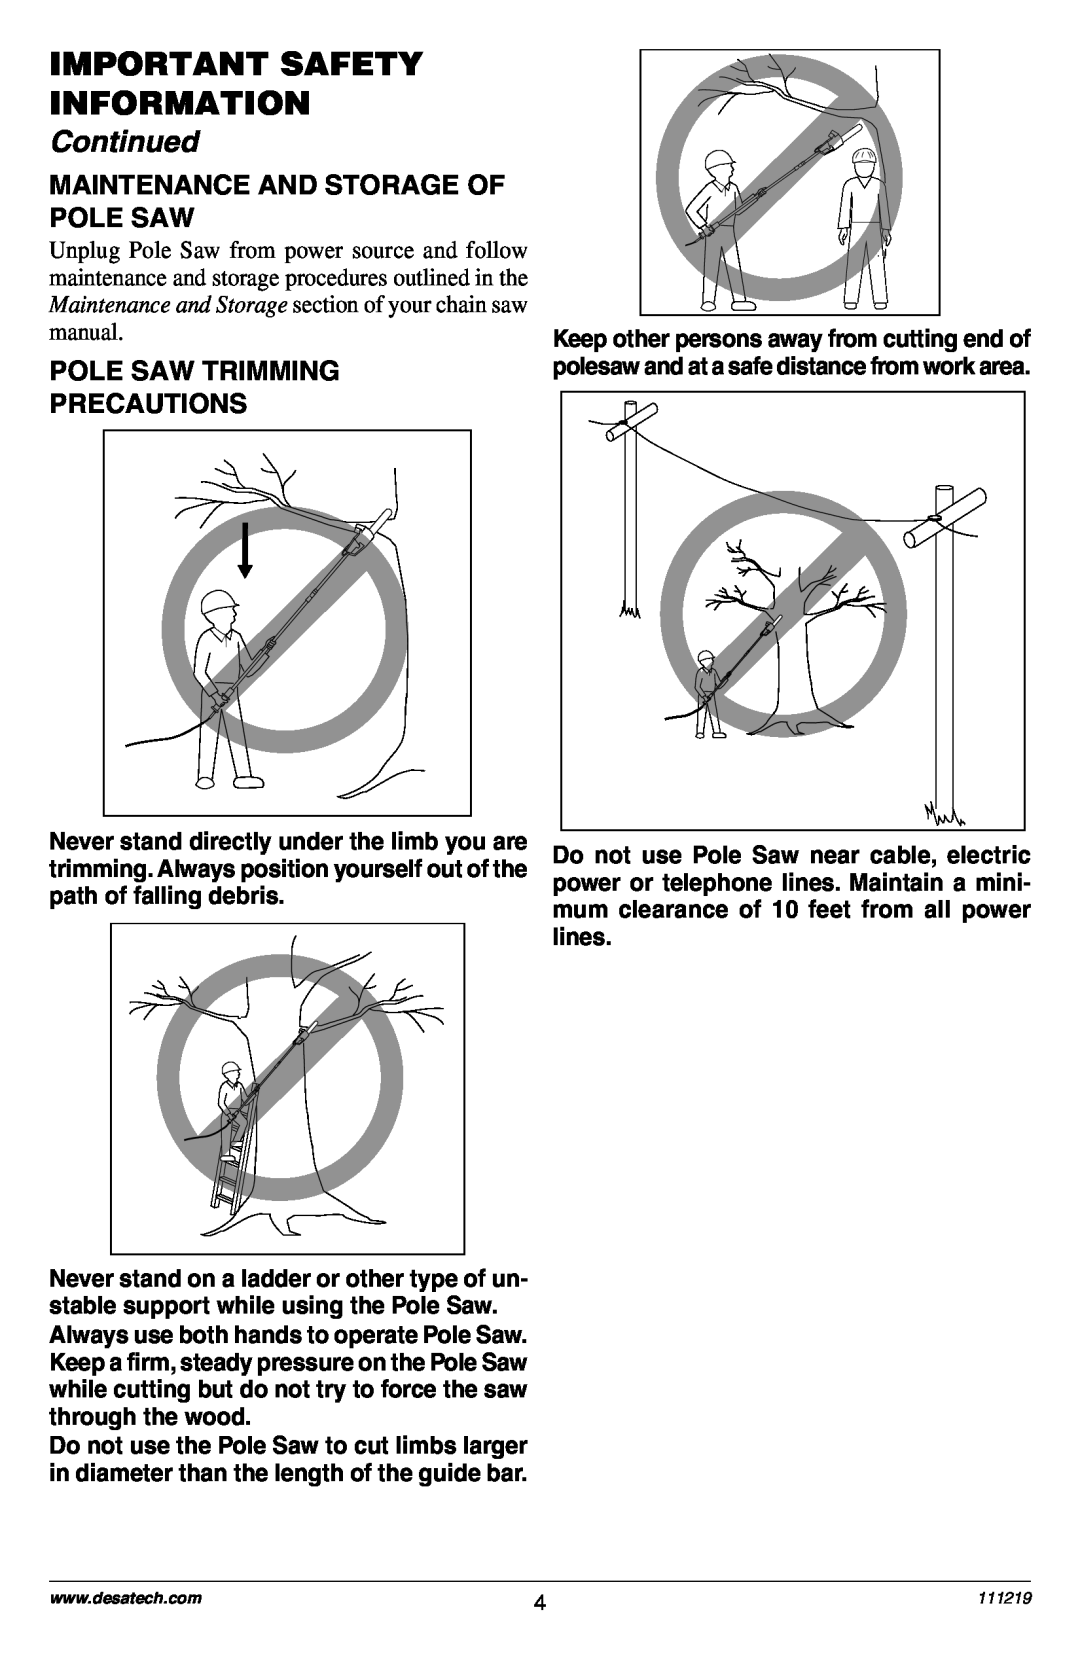 Remington RPS2N1: 106821A Maintenance And Storage Of Pole Saw, Pole Saw Trimming Precautions, Important Safety Information 